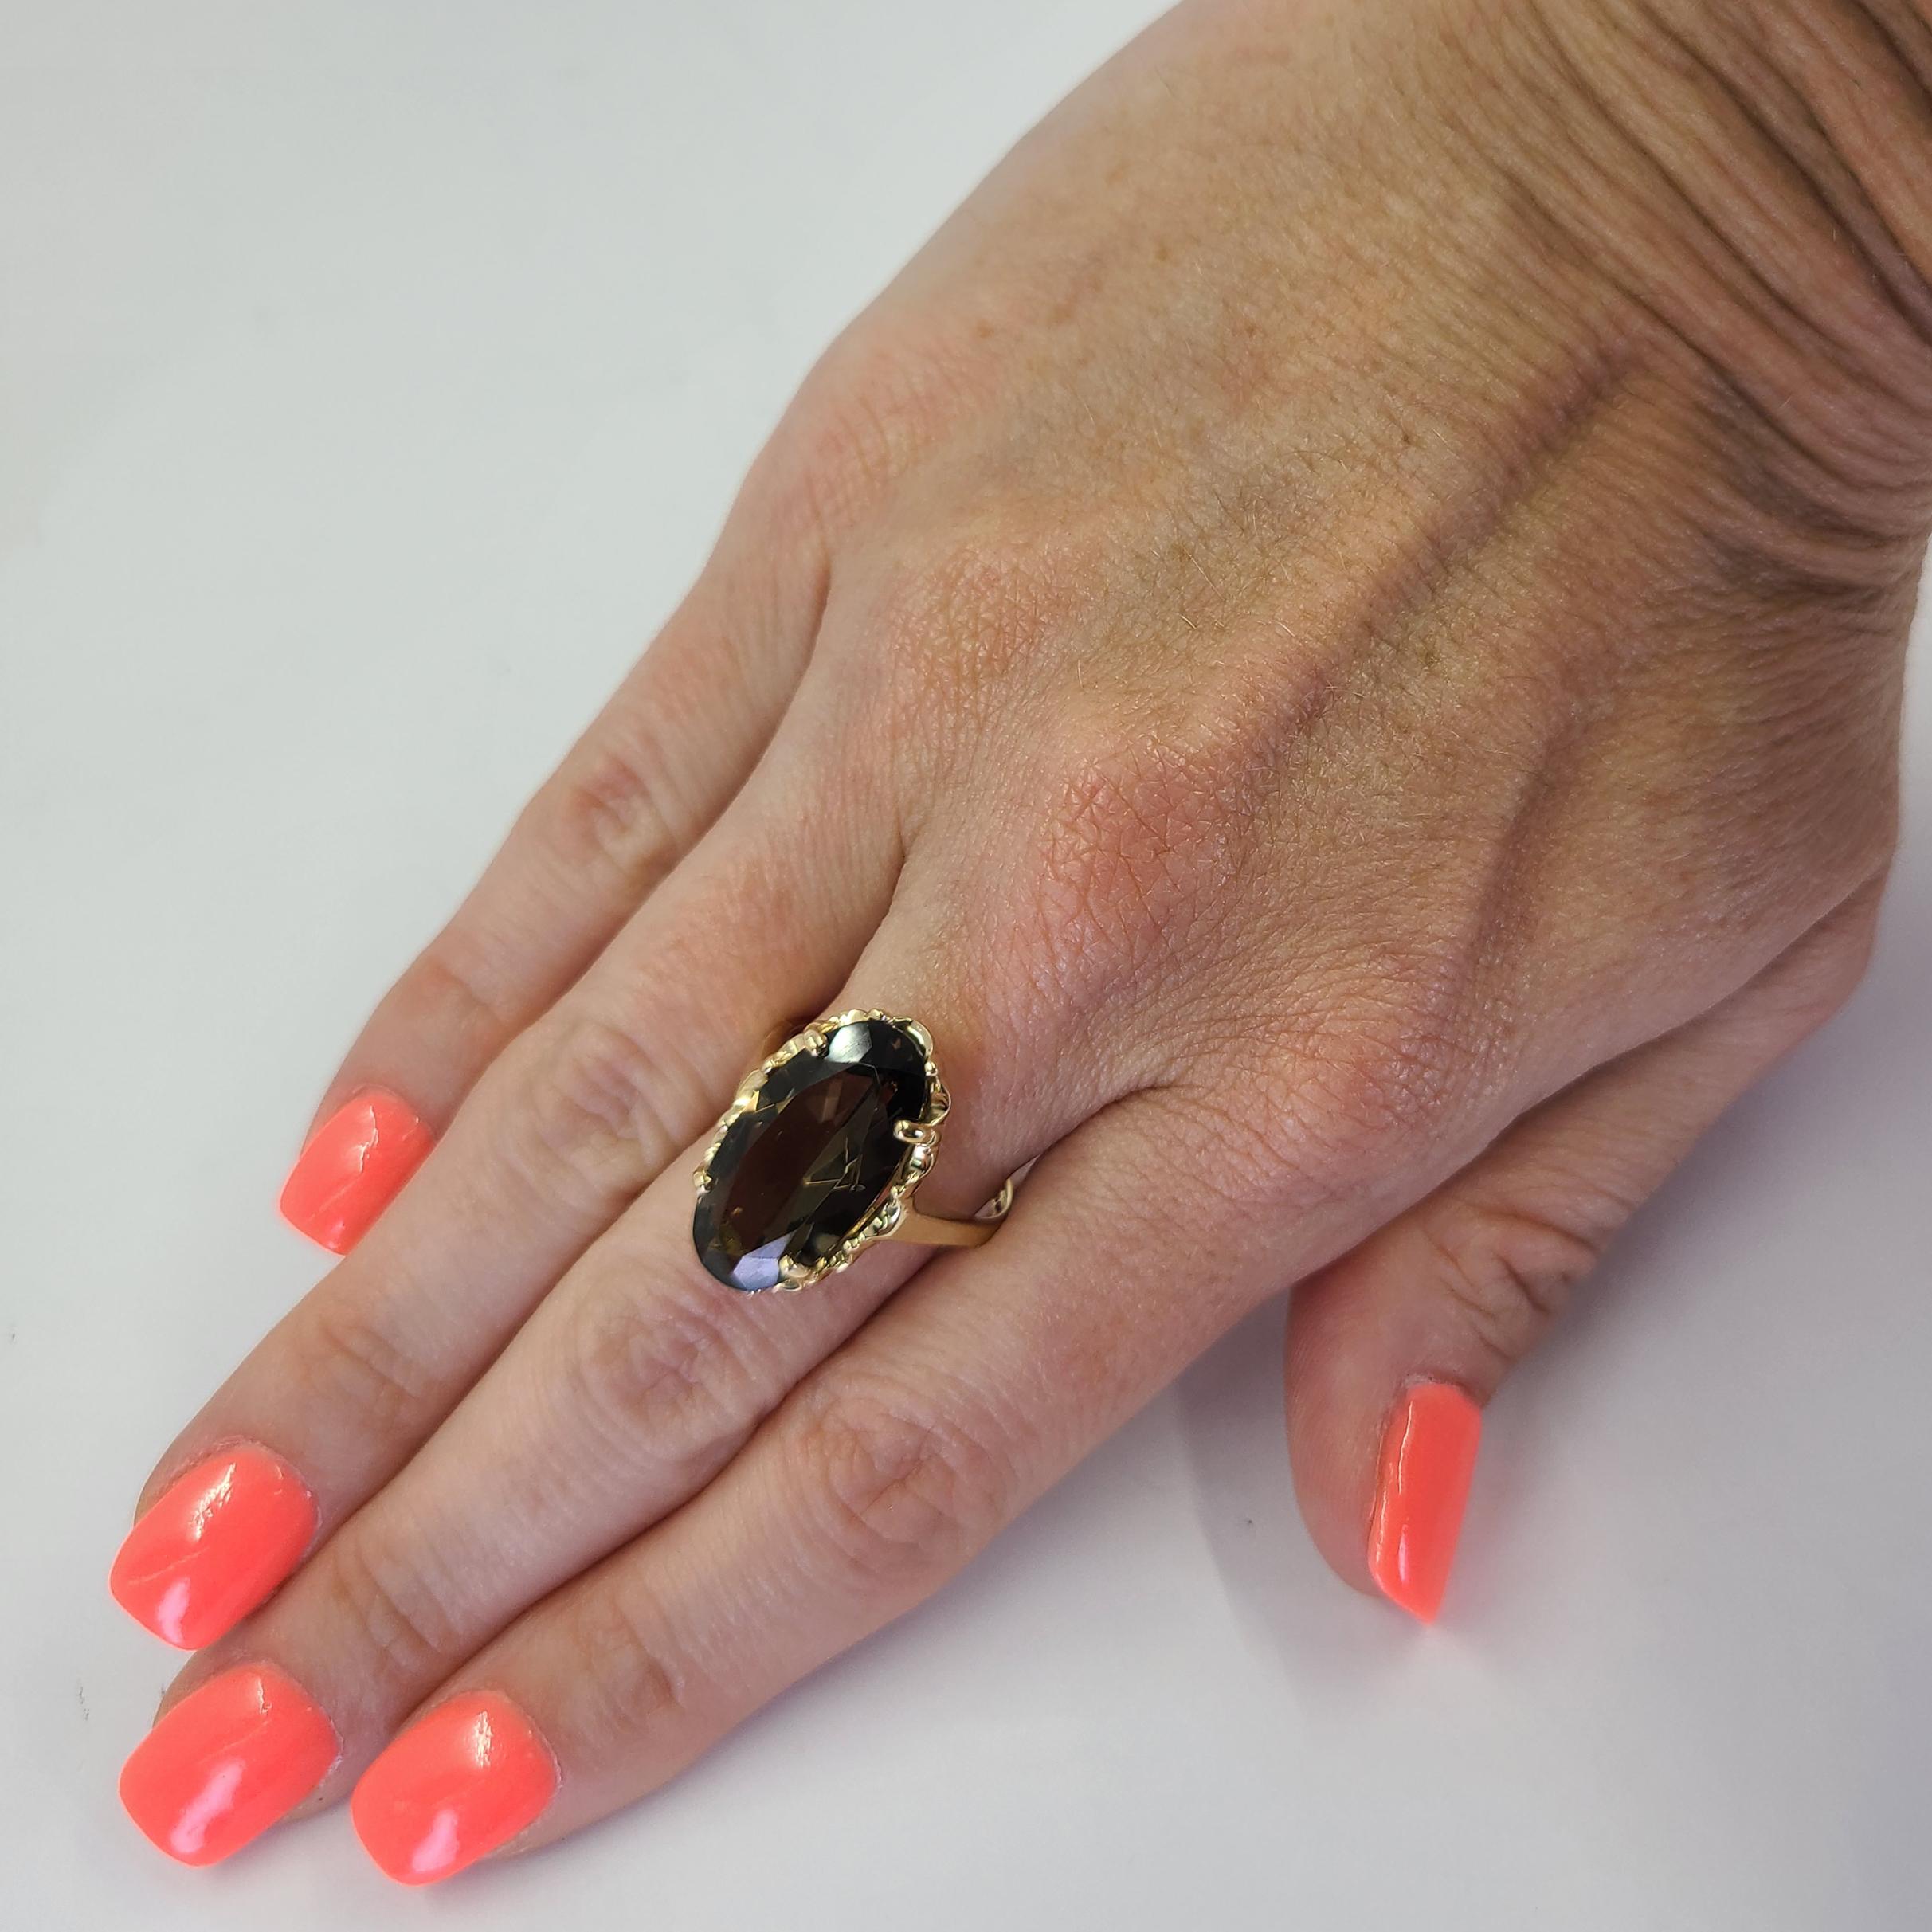 Smokey Quartz Solitaire Cocktail Ring In Good Condition For Sale In Coral Gables, FL